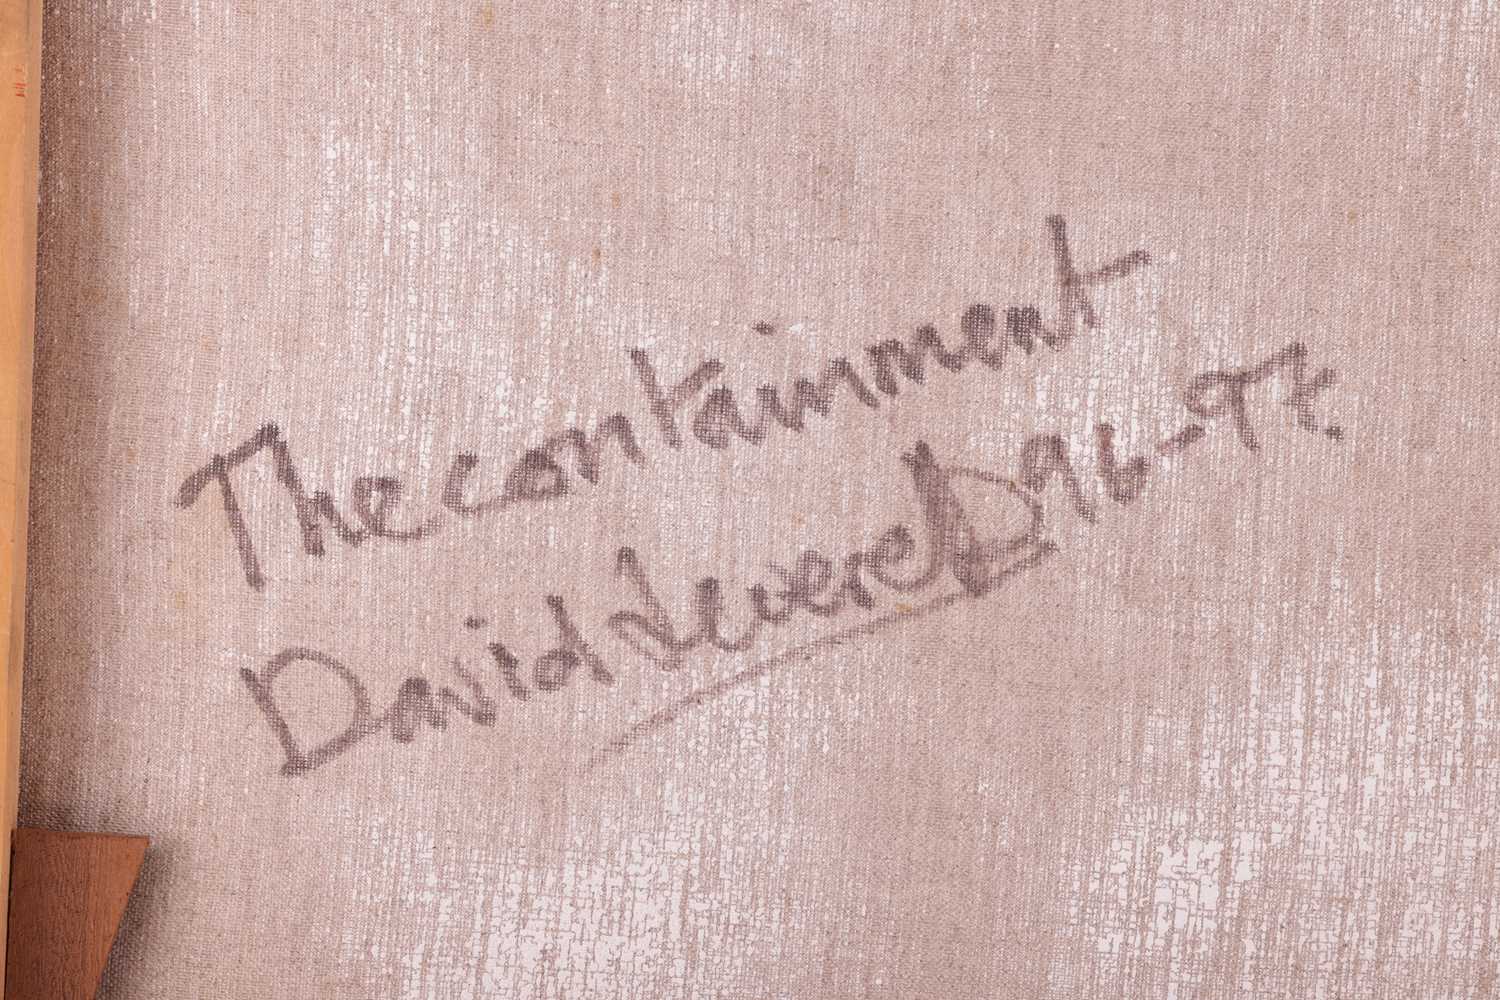 David Leverett (1938 - 2020), 'The Containment', signed dated and titled on the reverse 'David Lever - Image 4 of 4